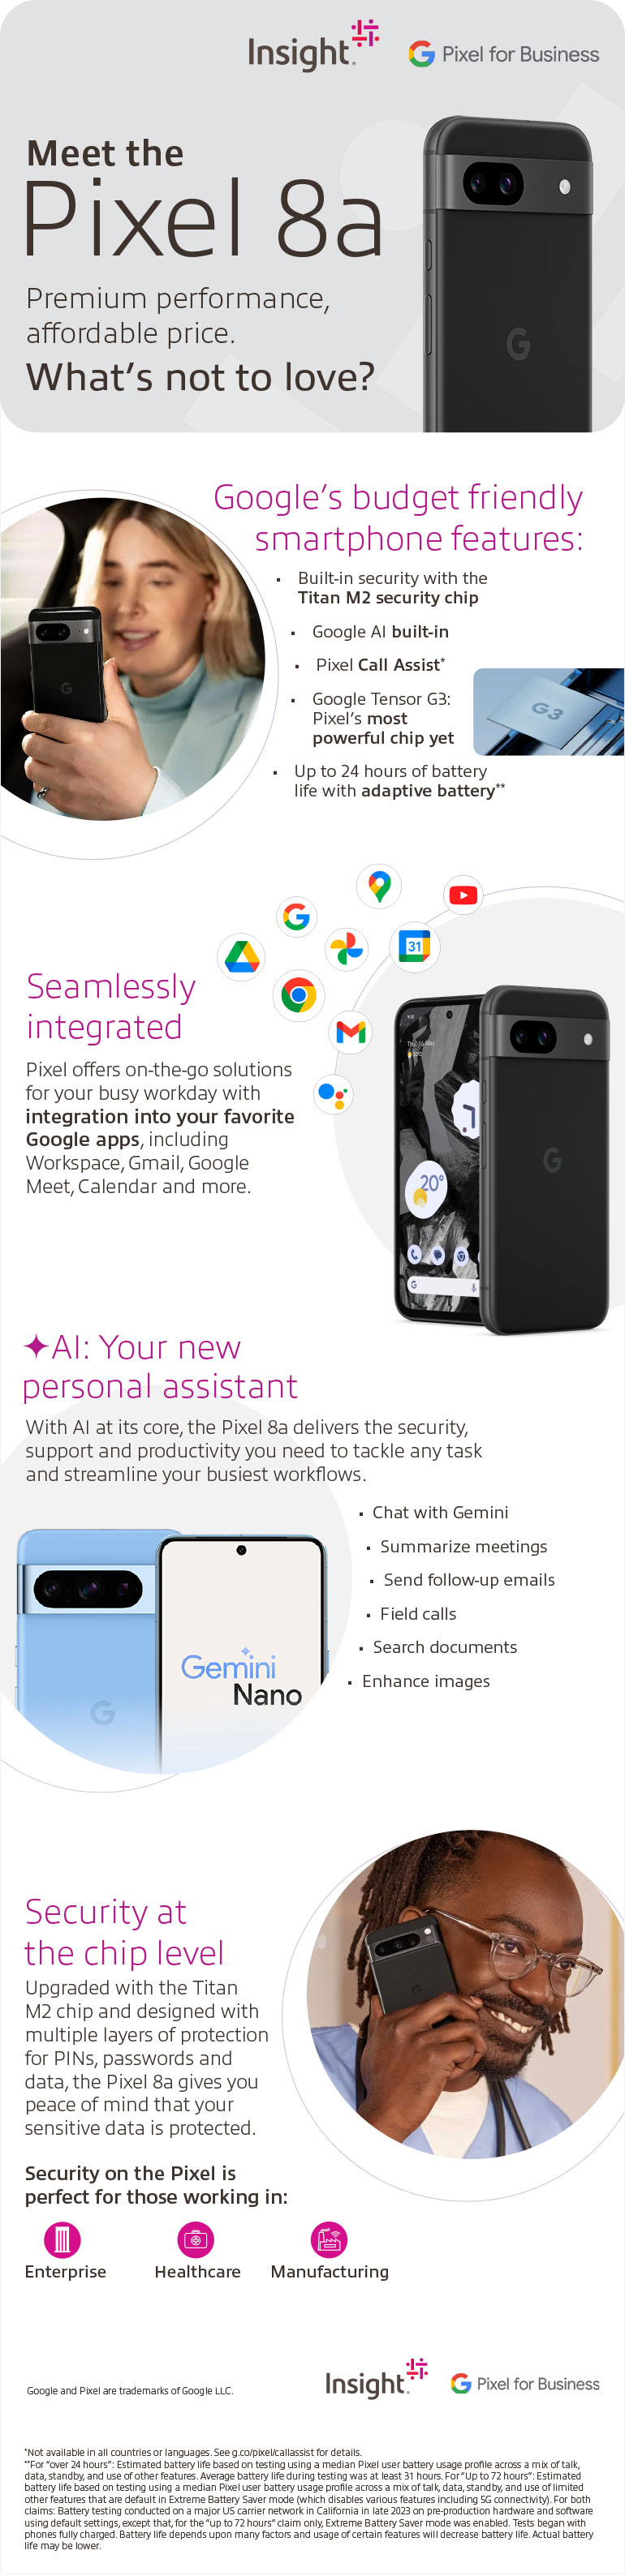 The Google Pixel 8a: Designed For Business infographic